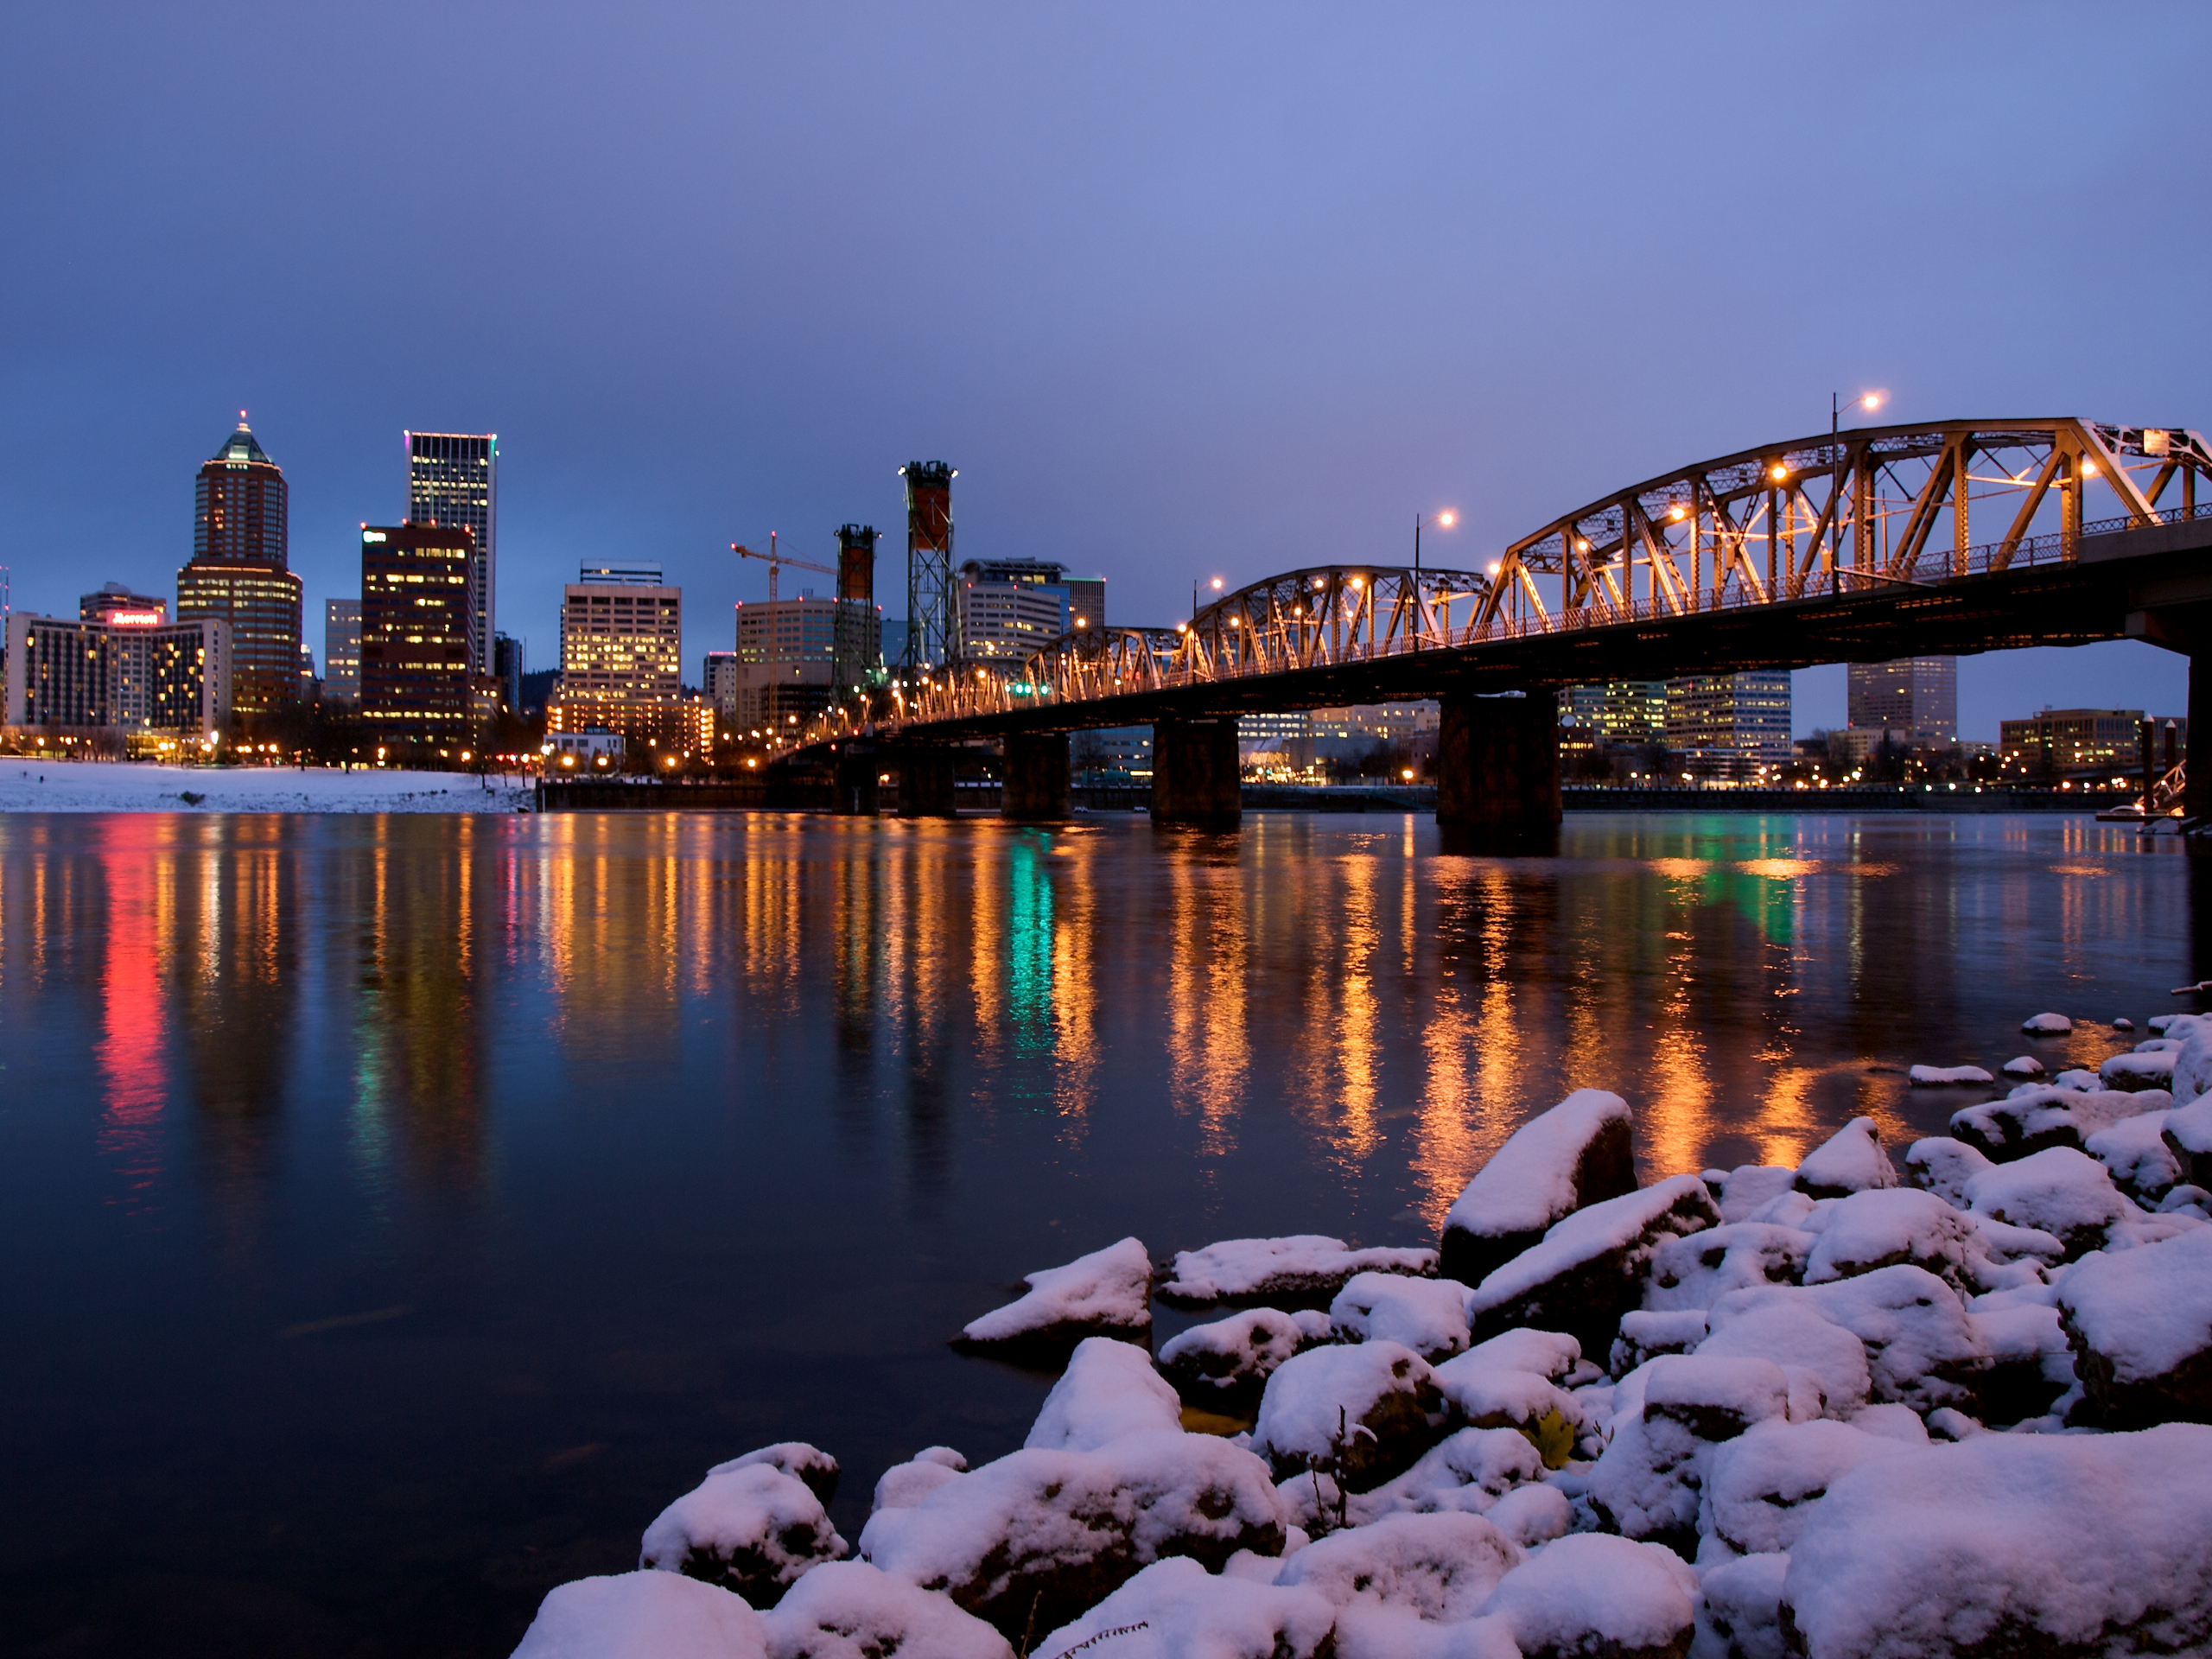 The city lights of Portland Oregon during winter with snow on the ground.